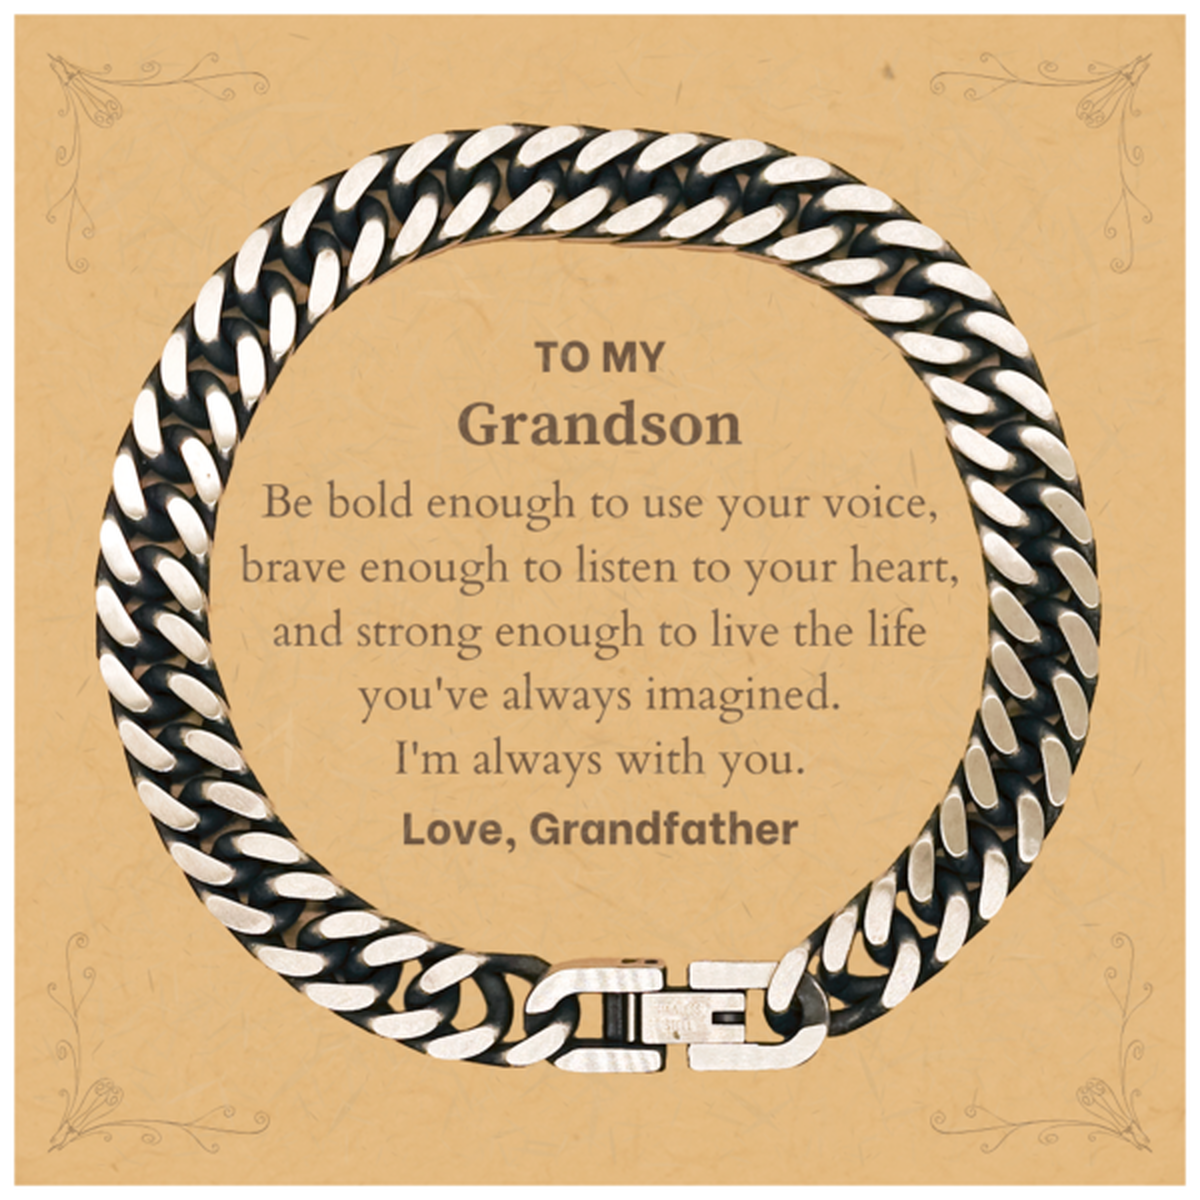 Keepsake Grandson Cuban Link Chain Bracelet Gift Idea Graduation Christmas Birthday Grandson from Grandfather, Grandson Be bold enough to use your voice, brave enough to listen to your heart. Love, Grandfather